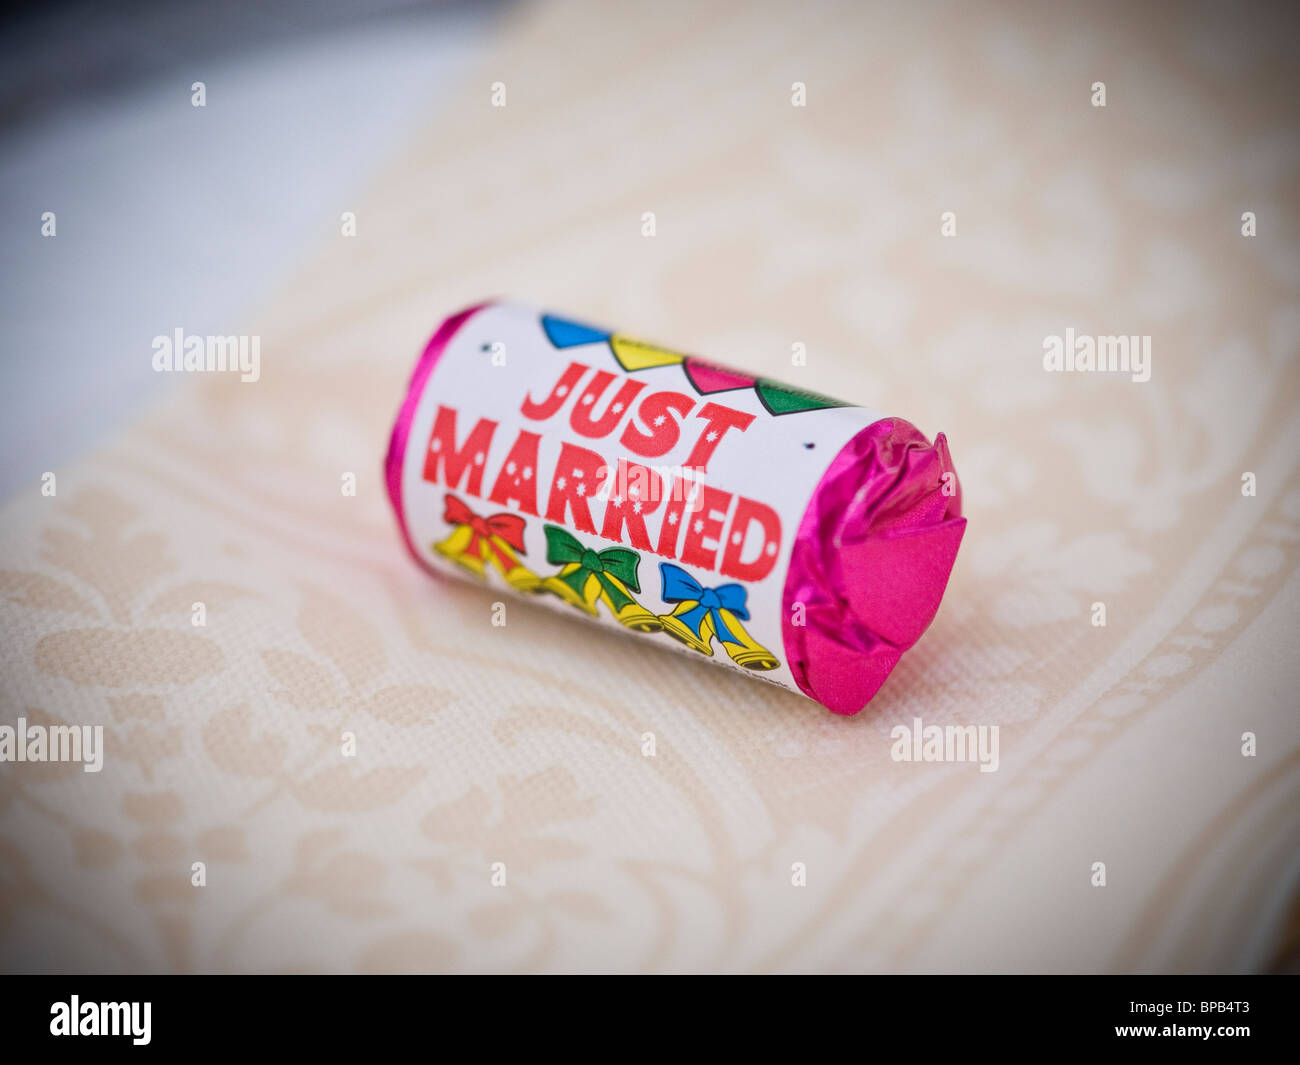 JUST MARRIED Love Hearts Sweets wedding favour on a napkin at wedding reception. Stock Photo